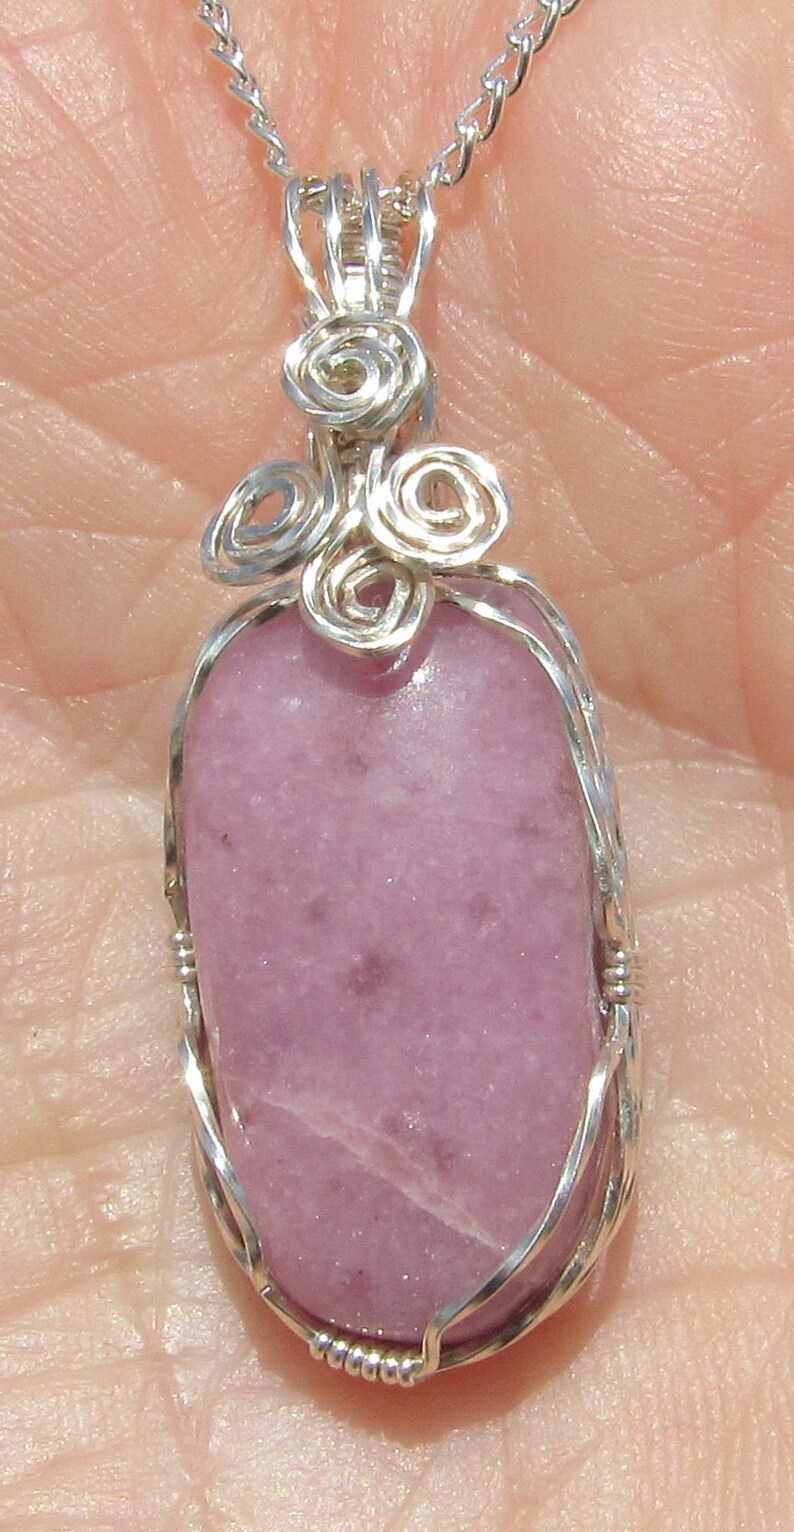 Lepidolite cabochon pendent wrapped in Argentium silver | Etsy